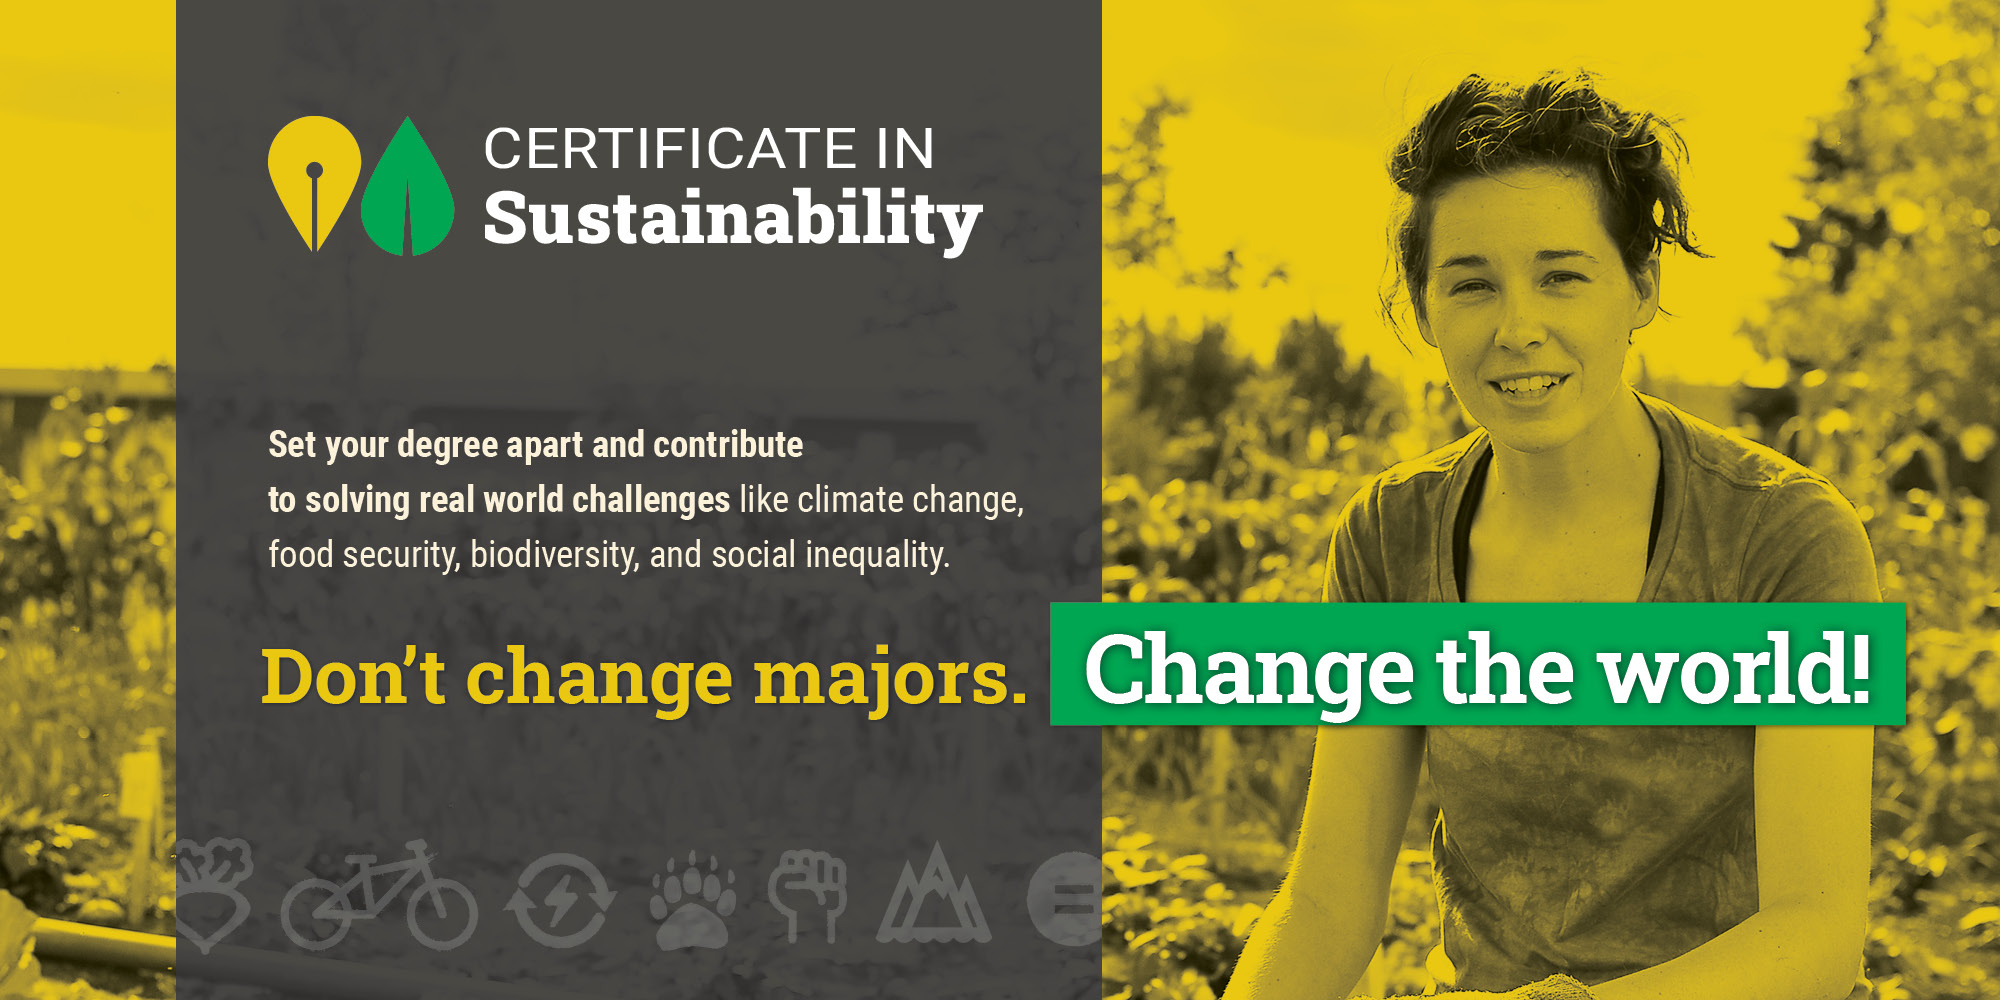 Certificate in Sustainability. Don't change majors, change the world!